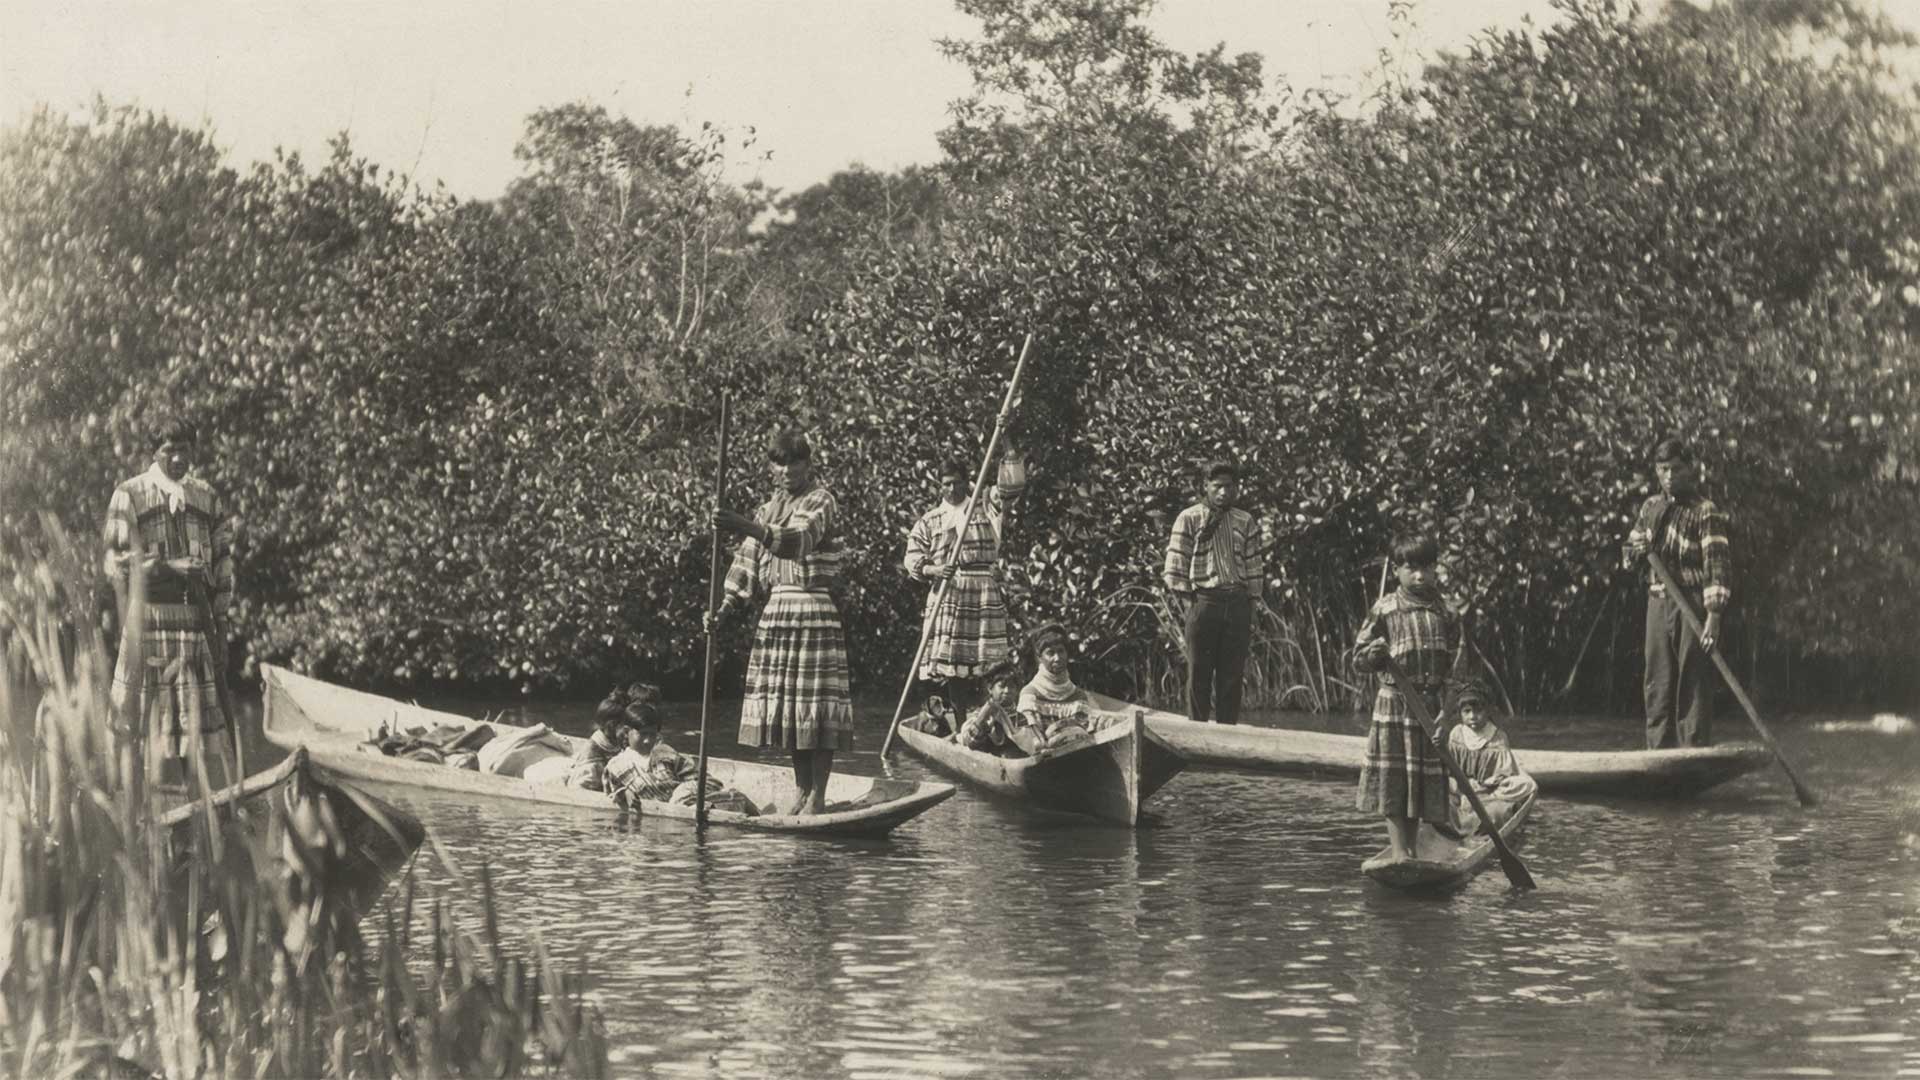 A group of Seminole Indians in dugout canoes in the Everglades, January 18, 1921.